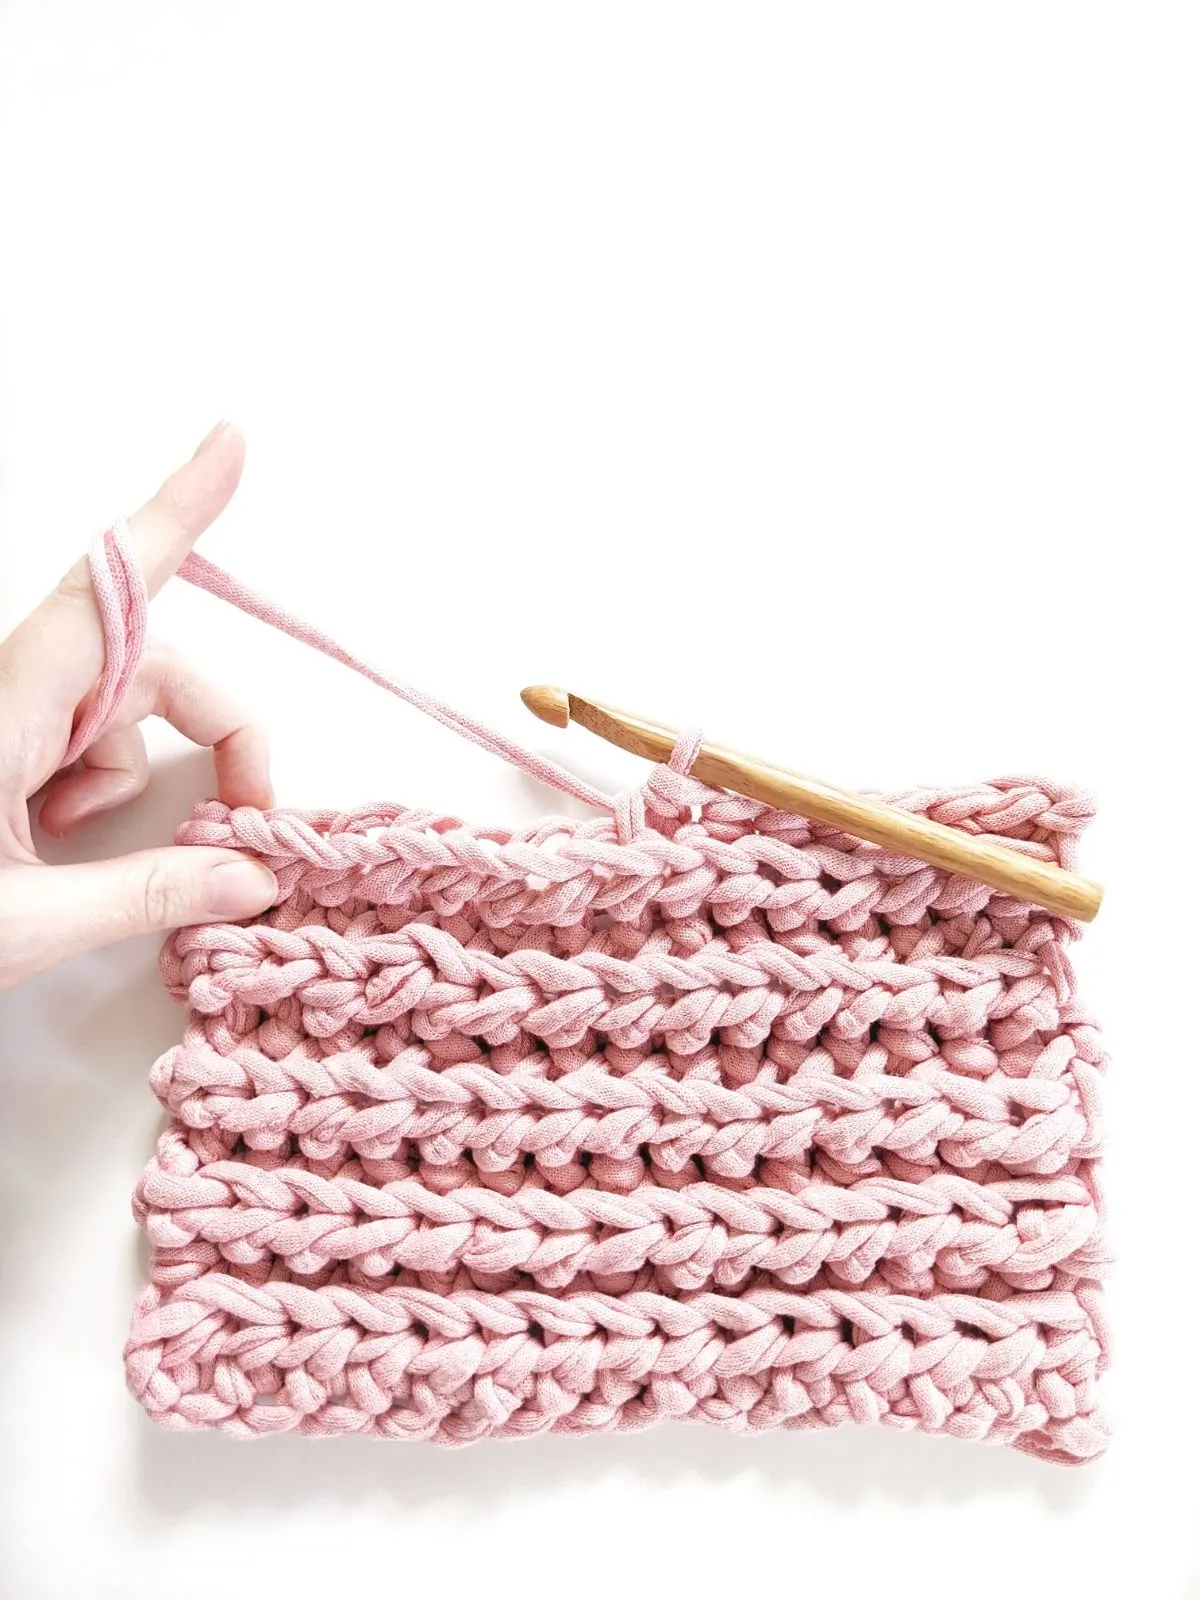 a swatch of the crochet knit-stitch with a wooden crochet hook.